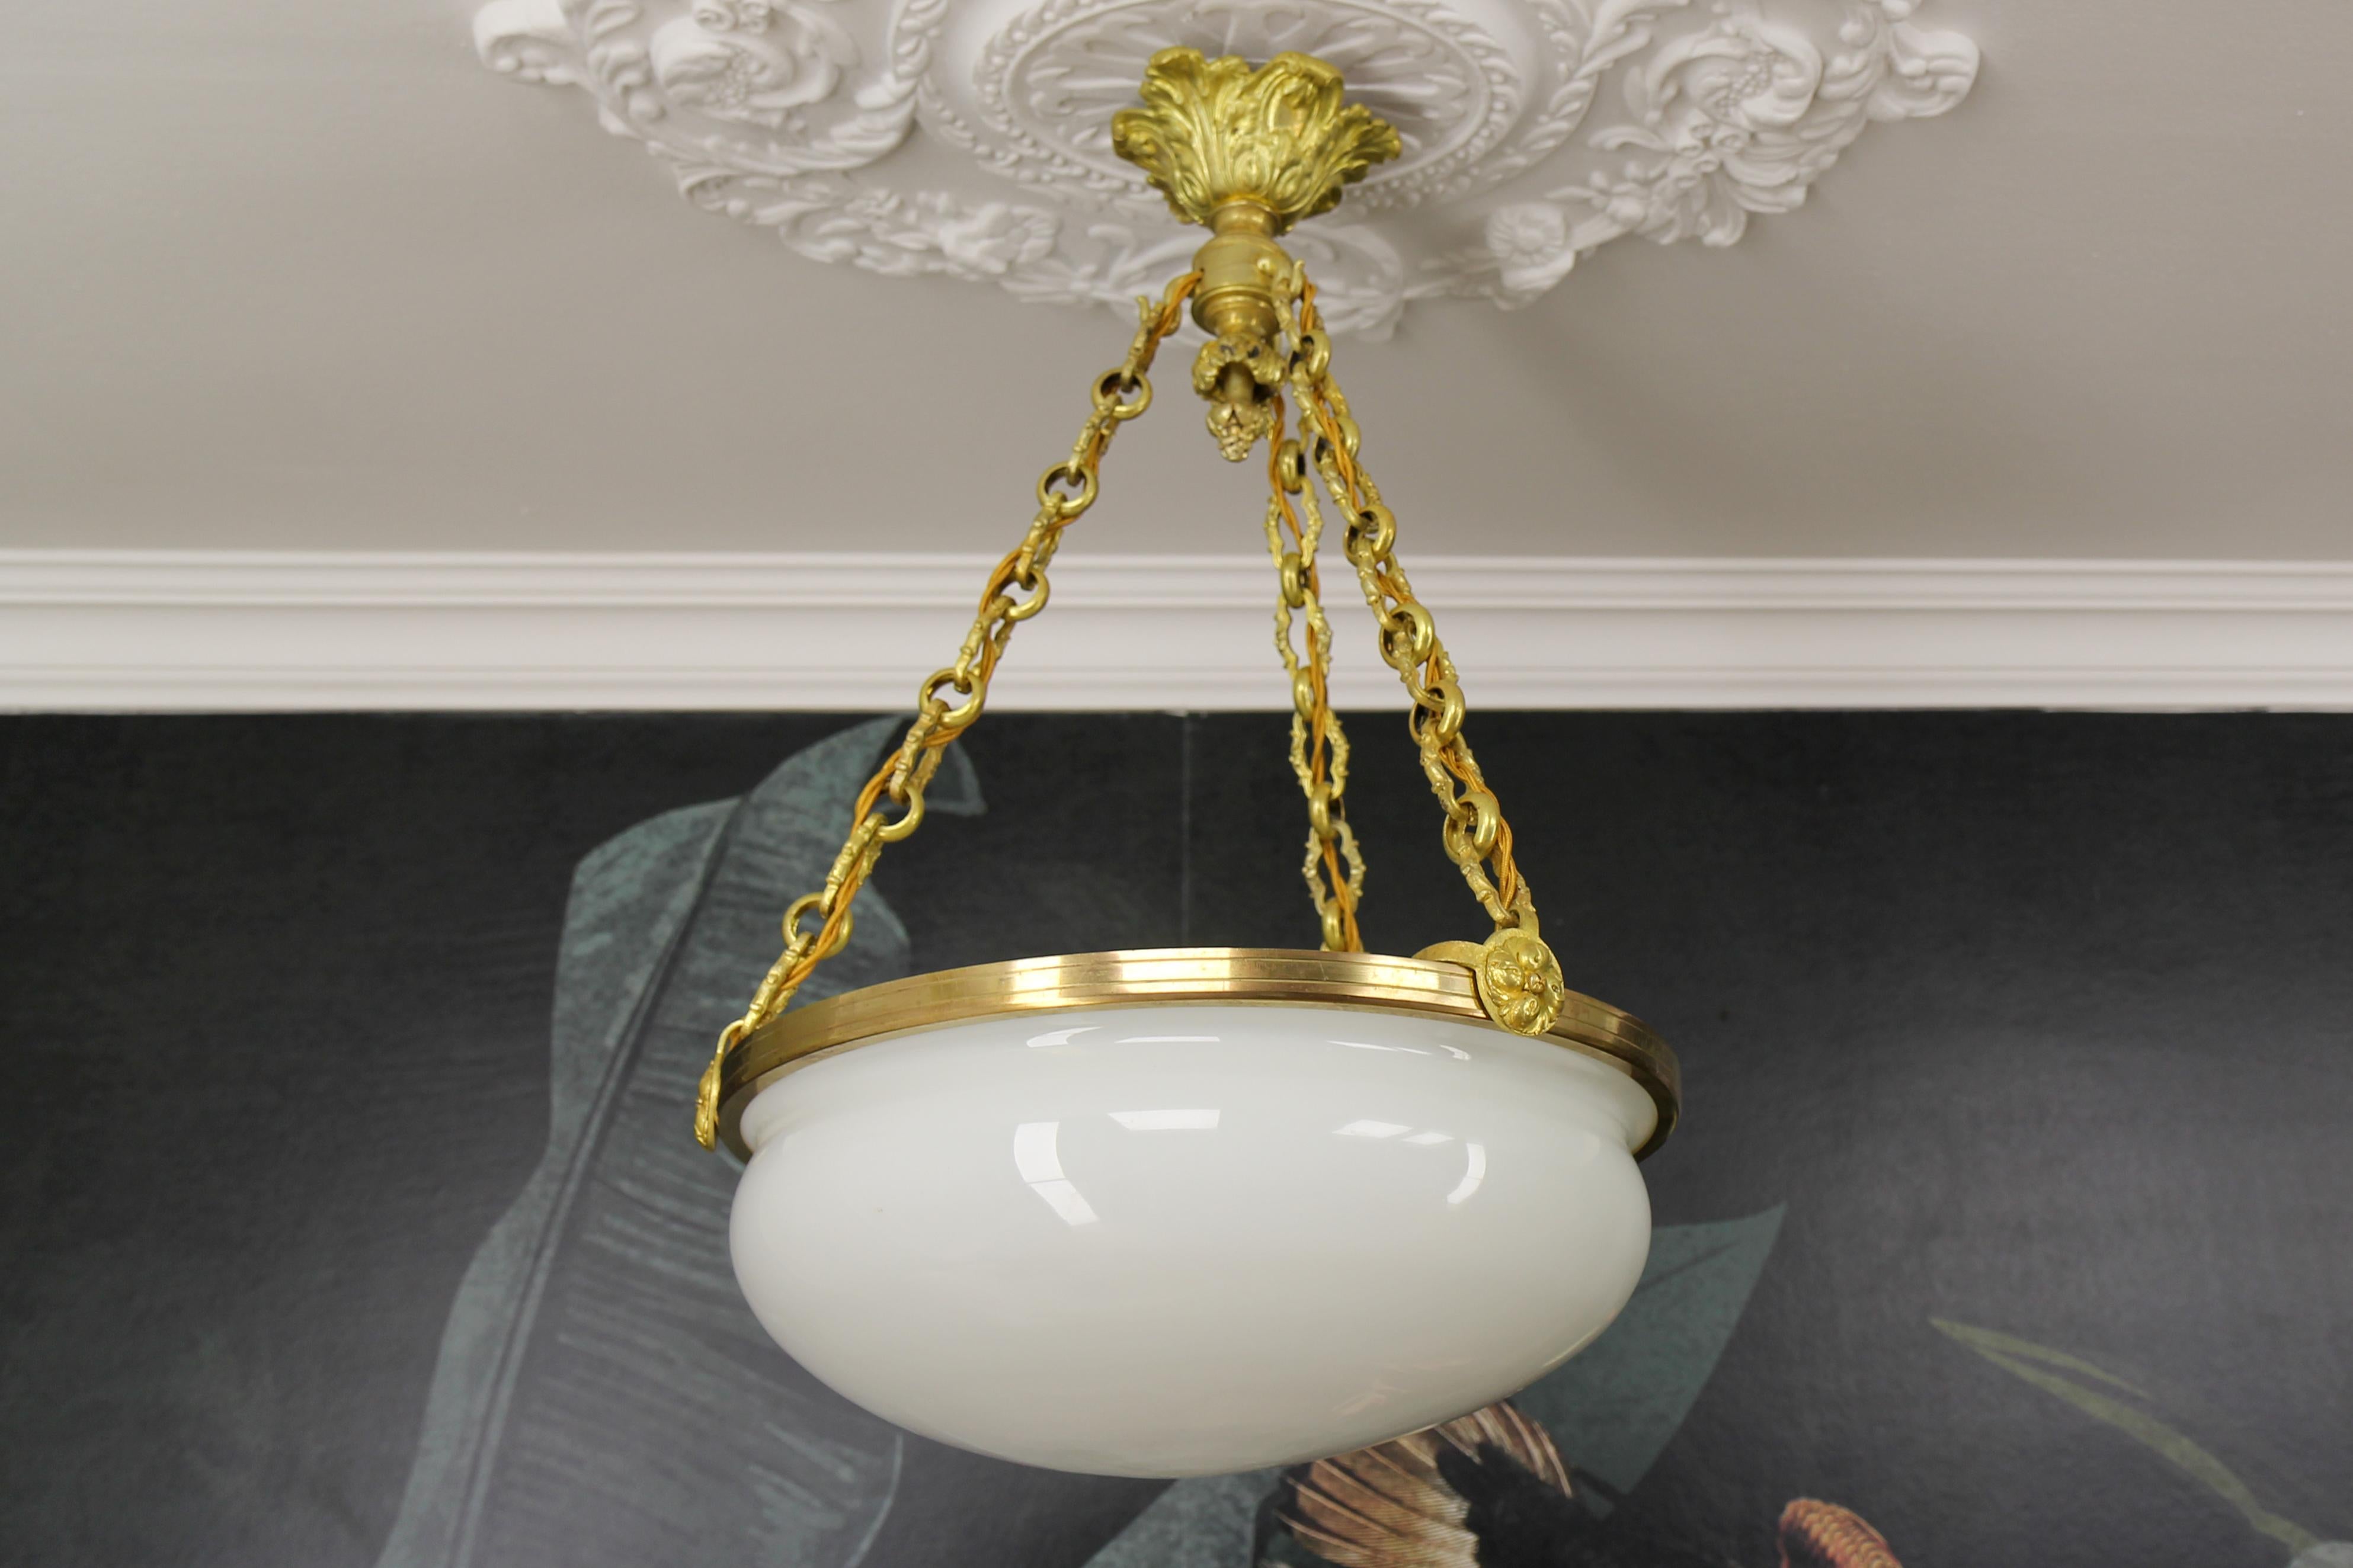 Antique French Louis XVI style white glass, brass, and bronze pendant chandelier from ca. 1920.
This stunning French three-light pendant chandelier features a white glass lampshade fastened with a brass rim and suspended from massive and ornate